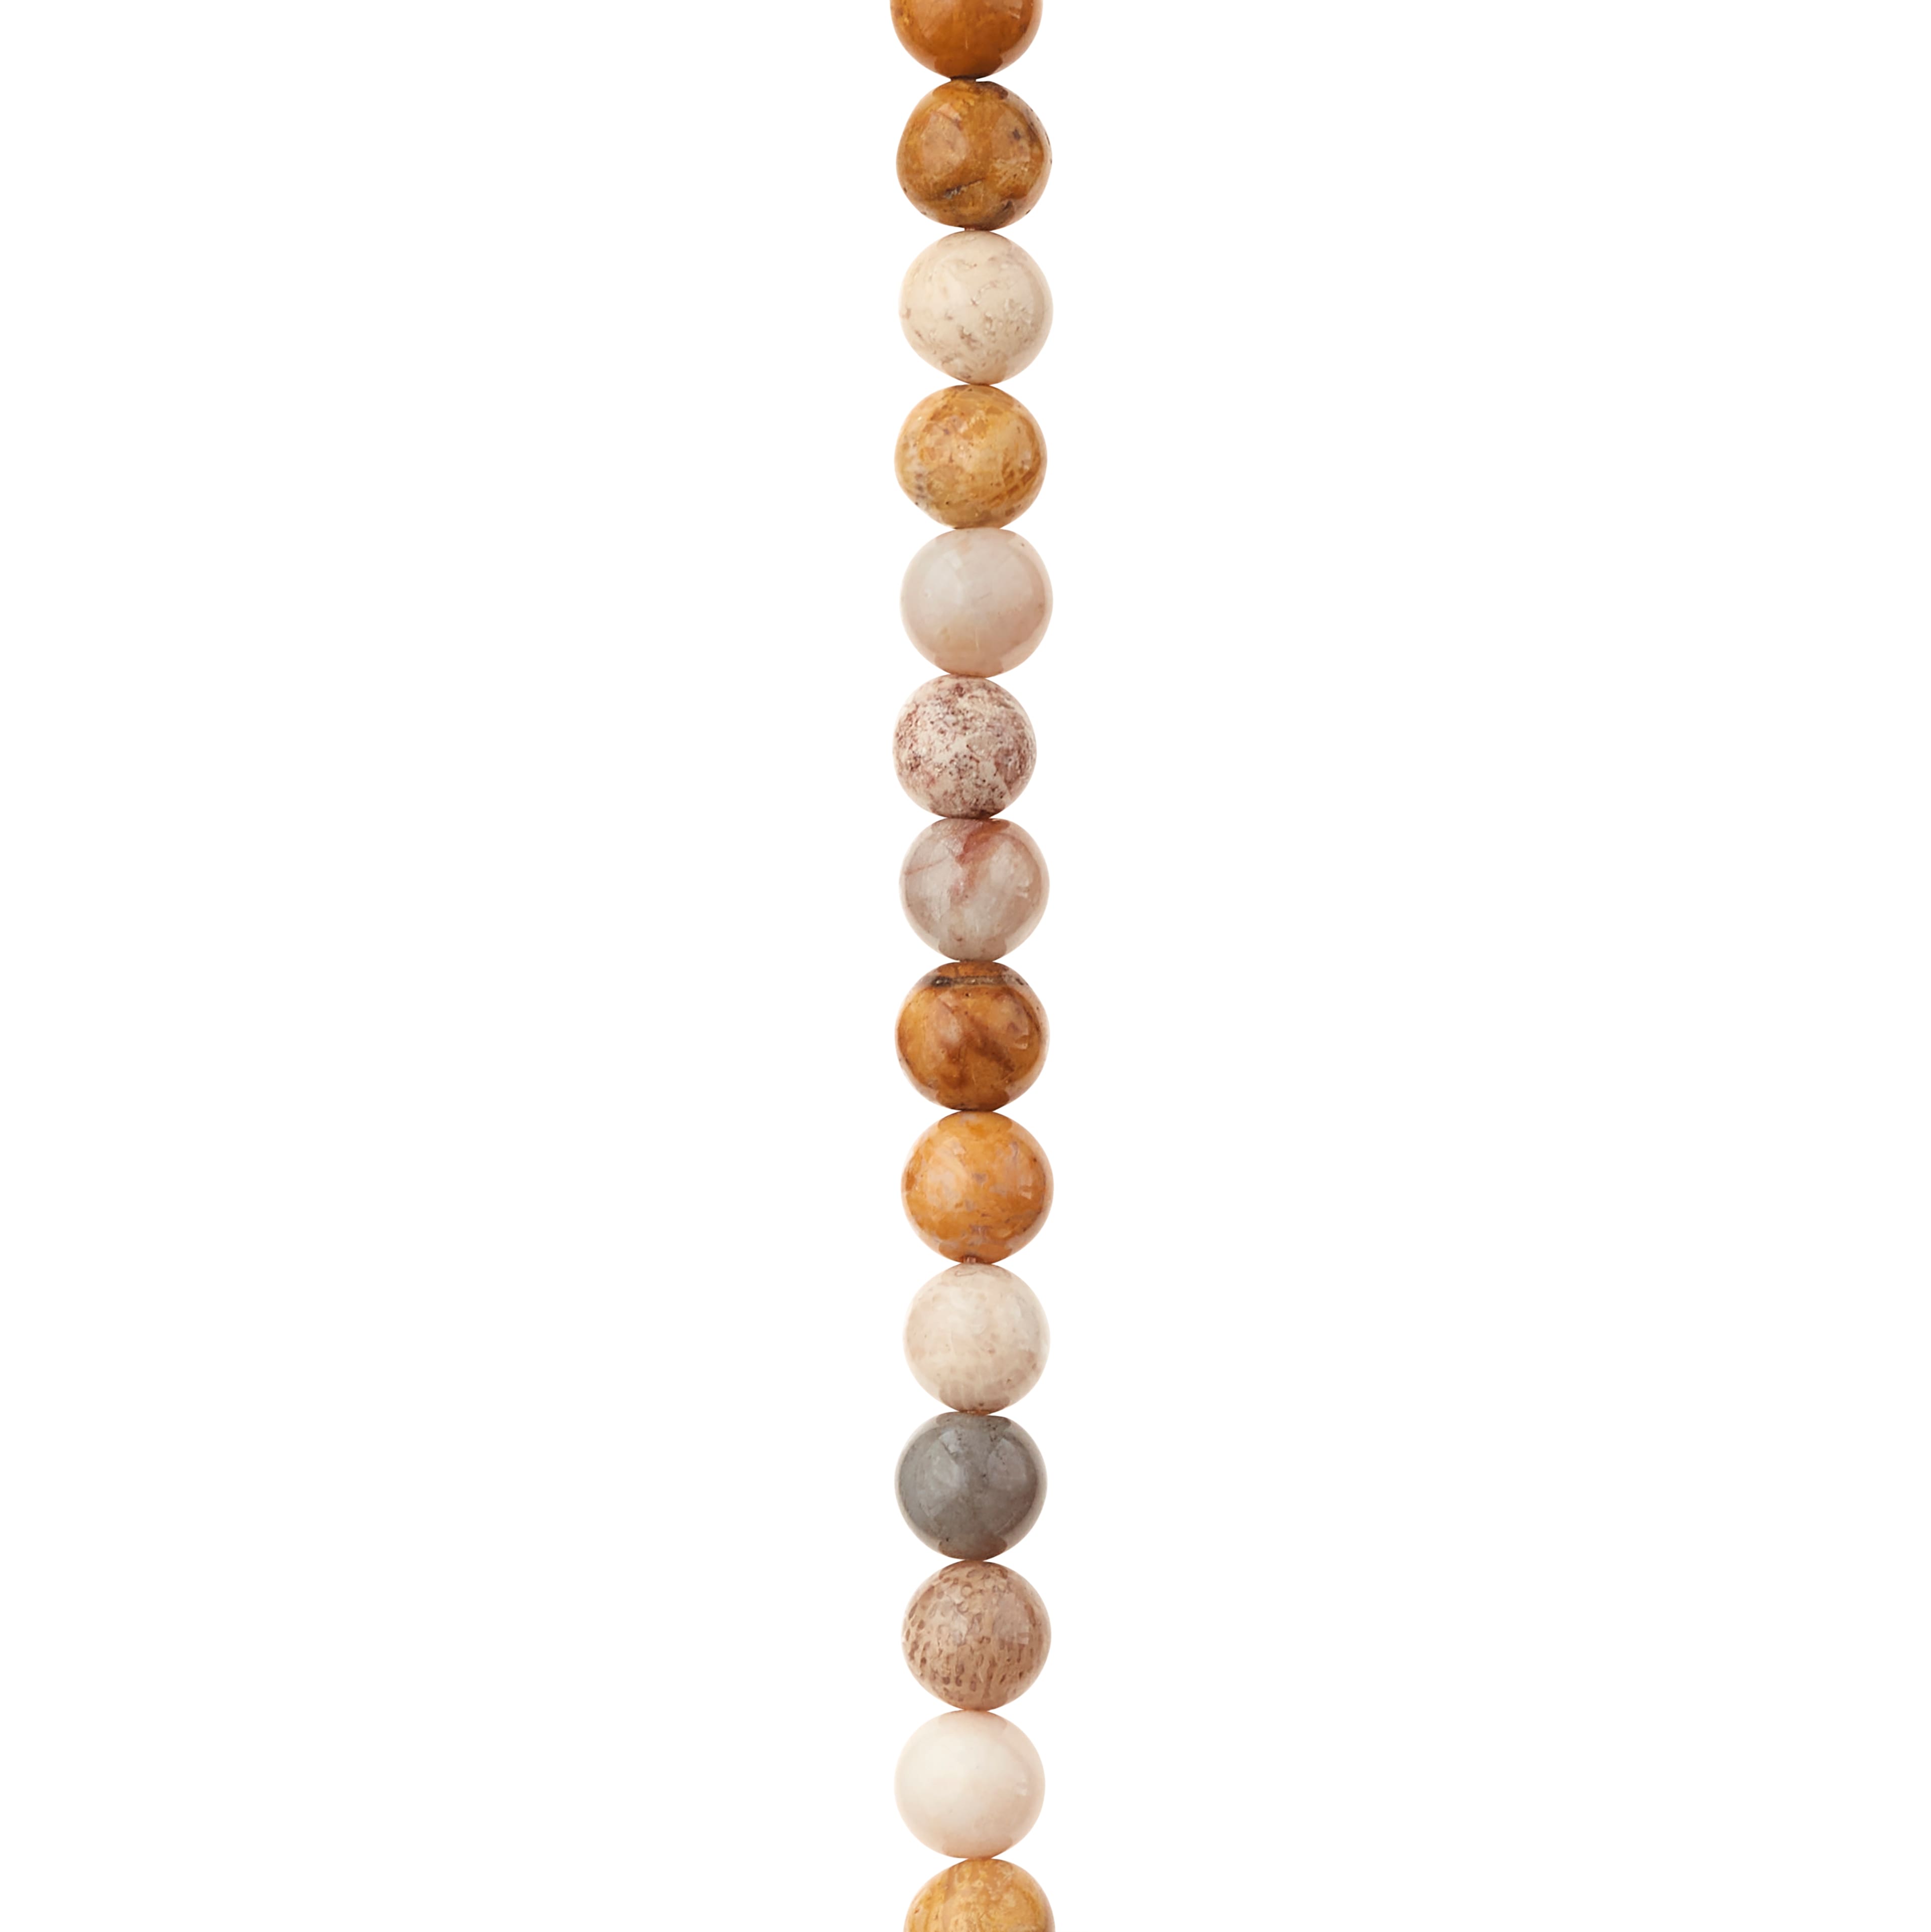 100 beige bamboo craft beads also suitable for jewelry making 